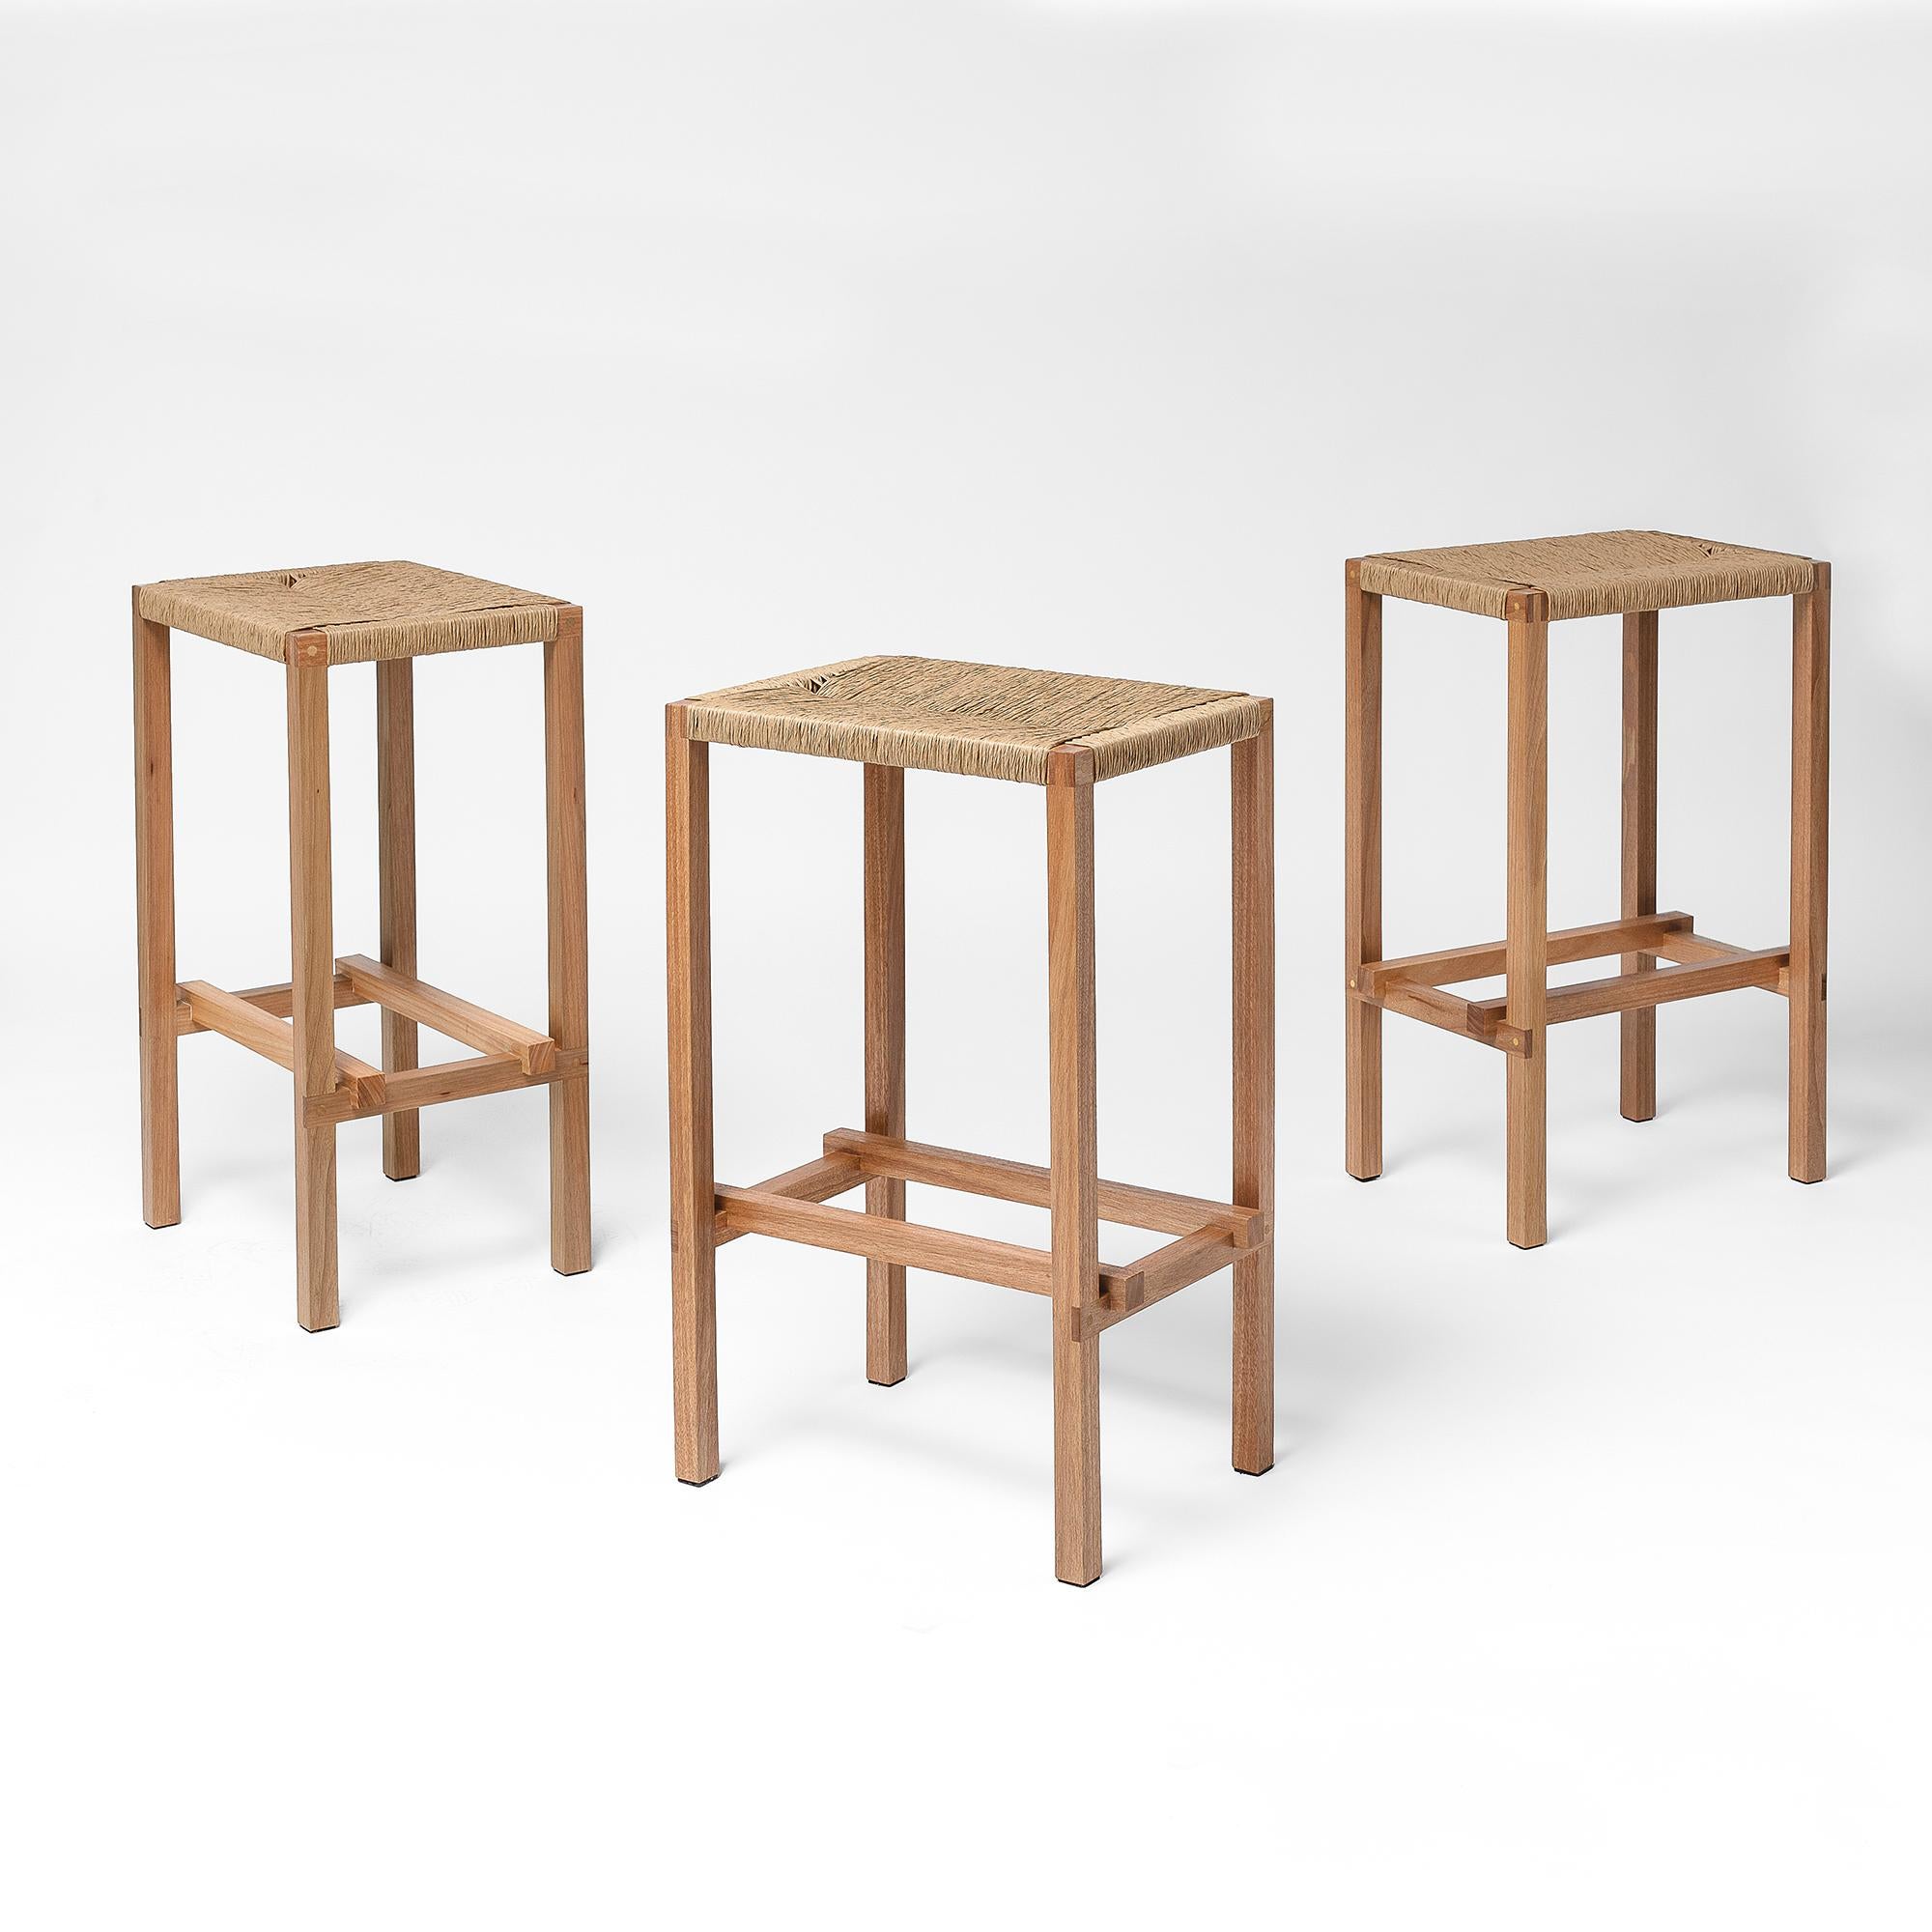 Other M2 Stool, Woven Seat Contemporary Handcrafted Solid Wood Furniture For Sale